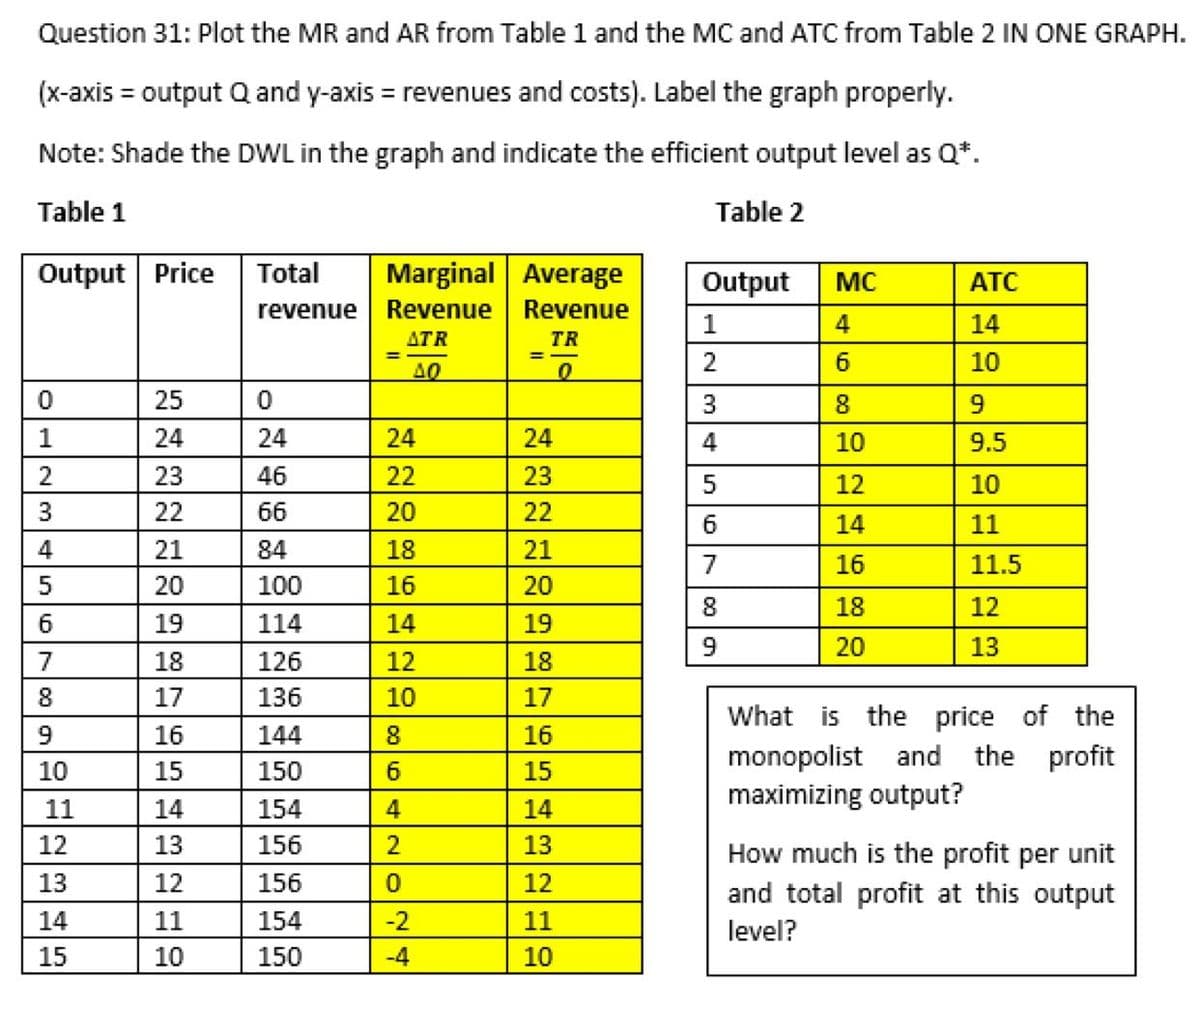 Question 31: Plot the MR and AR from Table 1 and the MC and ATC from Table 2 IN ONE GRAPH.
(x-axis = output Q and y-axis = revenues and costs). Label the graph properly.
Note: Shade the DWL in the graph and indicate the efficient output level as Q*.
Table 1
Table 2
Output Price
Total
Average
MC
ATC
Marginal
Revenue
revenue
Revenue
4
14
ATR
TR
=
6
10
AQ
0
0
25
0
8
9
24
24
10
9.5
23
46
12
10
22
66
6
14
11
21
84
7
16
11.5
20
100
8
18
12
19
114
9
20
13
18
126
17
136
What is the price of the
16
144
15
150
monopolist and the profit
maximizing output?
14
154
13
15
How much is the profit per unit
12
156
and total profit at this output
11
154
level?
10
150
1
2
3
4
5
6
الامام
7
8
9
922
10
11
13
14
15
45
24
22
20
18
16
14
12
10
8
6
4
0
-2
-4
24
23
22
21
20
19
18
17
16
15
14
13
12
11
10
Output
1
2
3
4
5